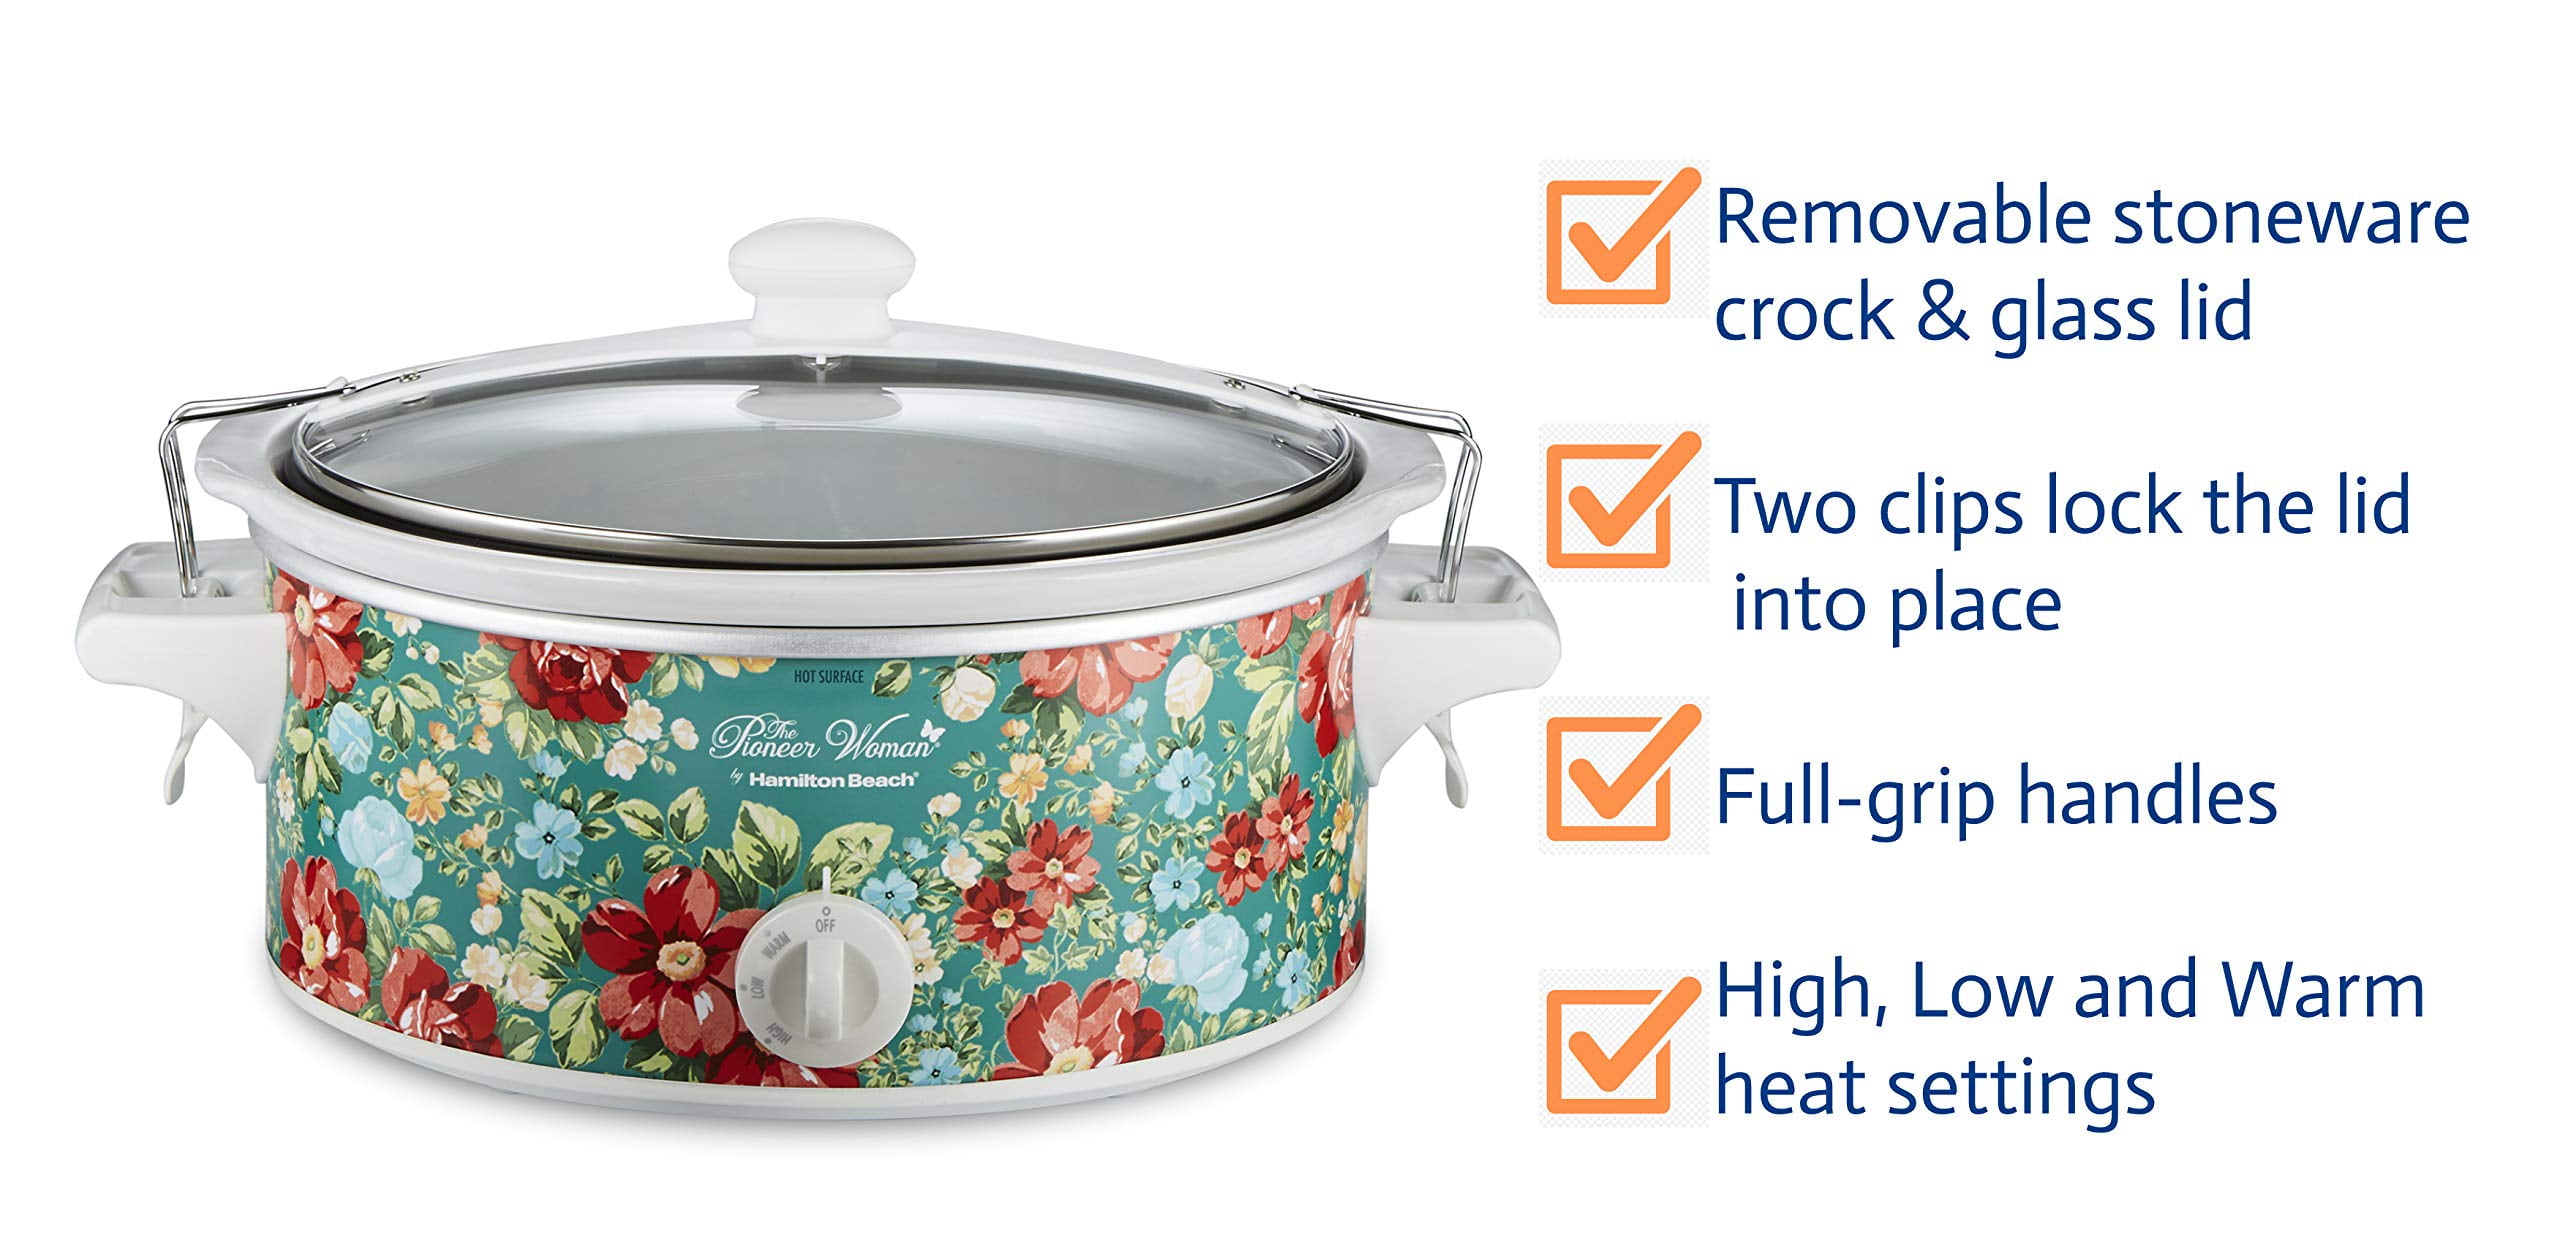 The Pioneer Woman Melody 6 Quart Portable Slow Cooker, 33063 in Melody -  appliances - by owner - sale - craigslist